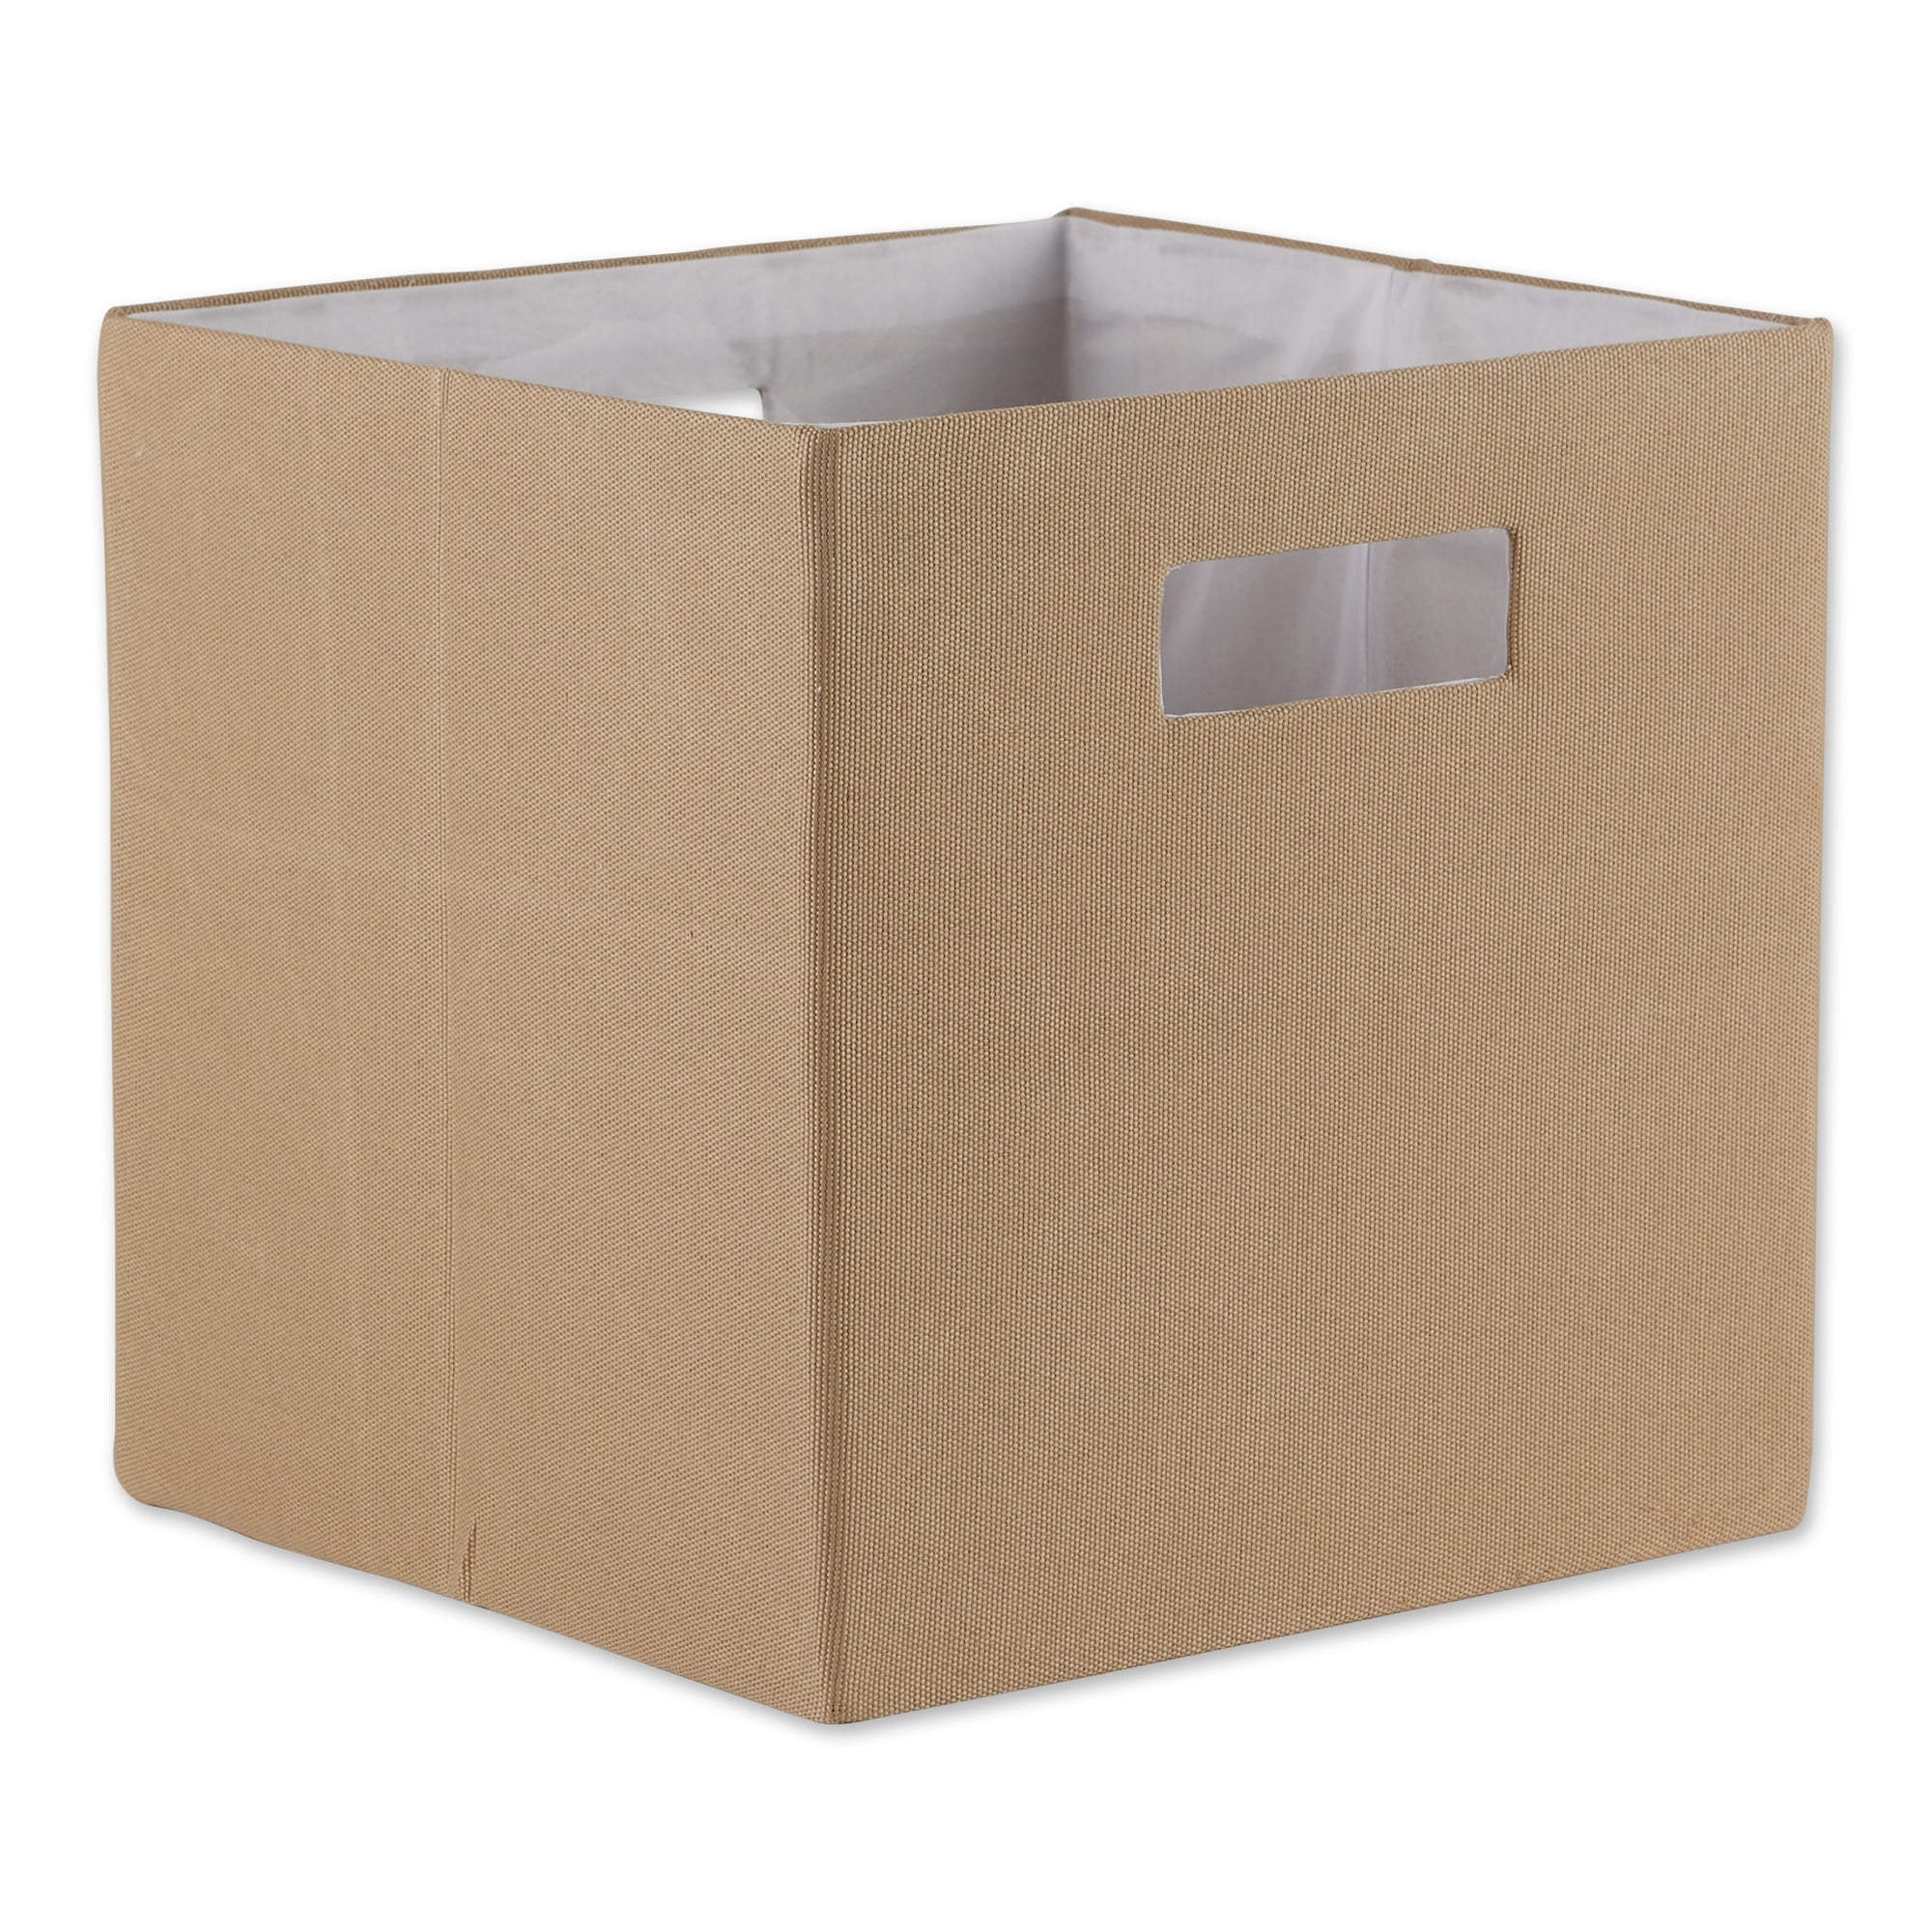 Picture of Design Imports CAMZ12914 13 x 13 x 13 in. Solid Polyester Cube Storage - Stone - Square